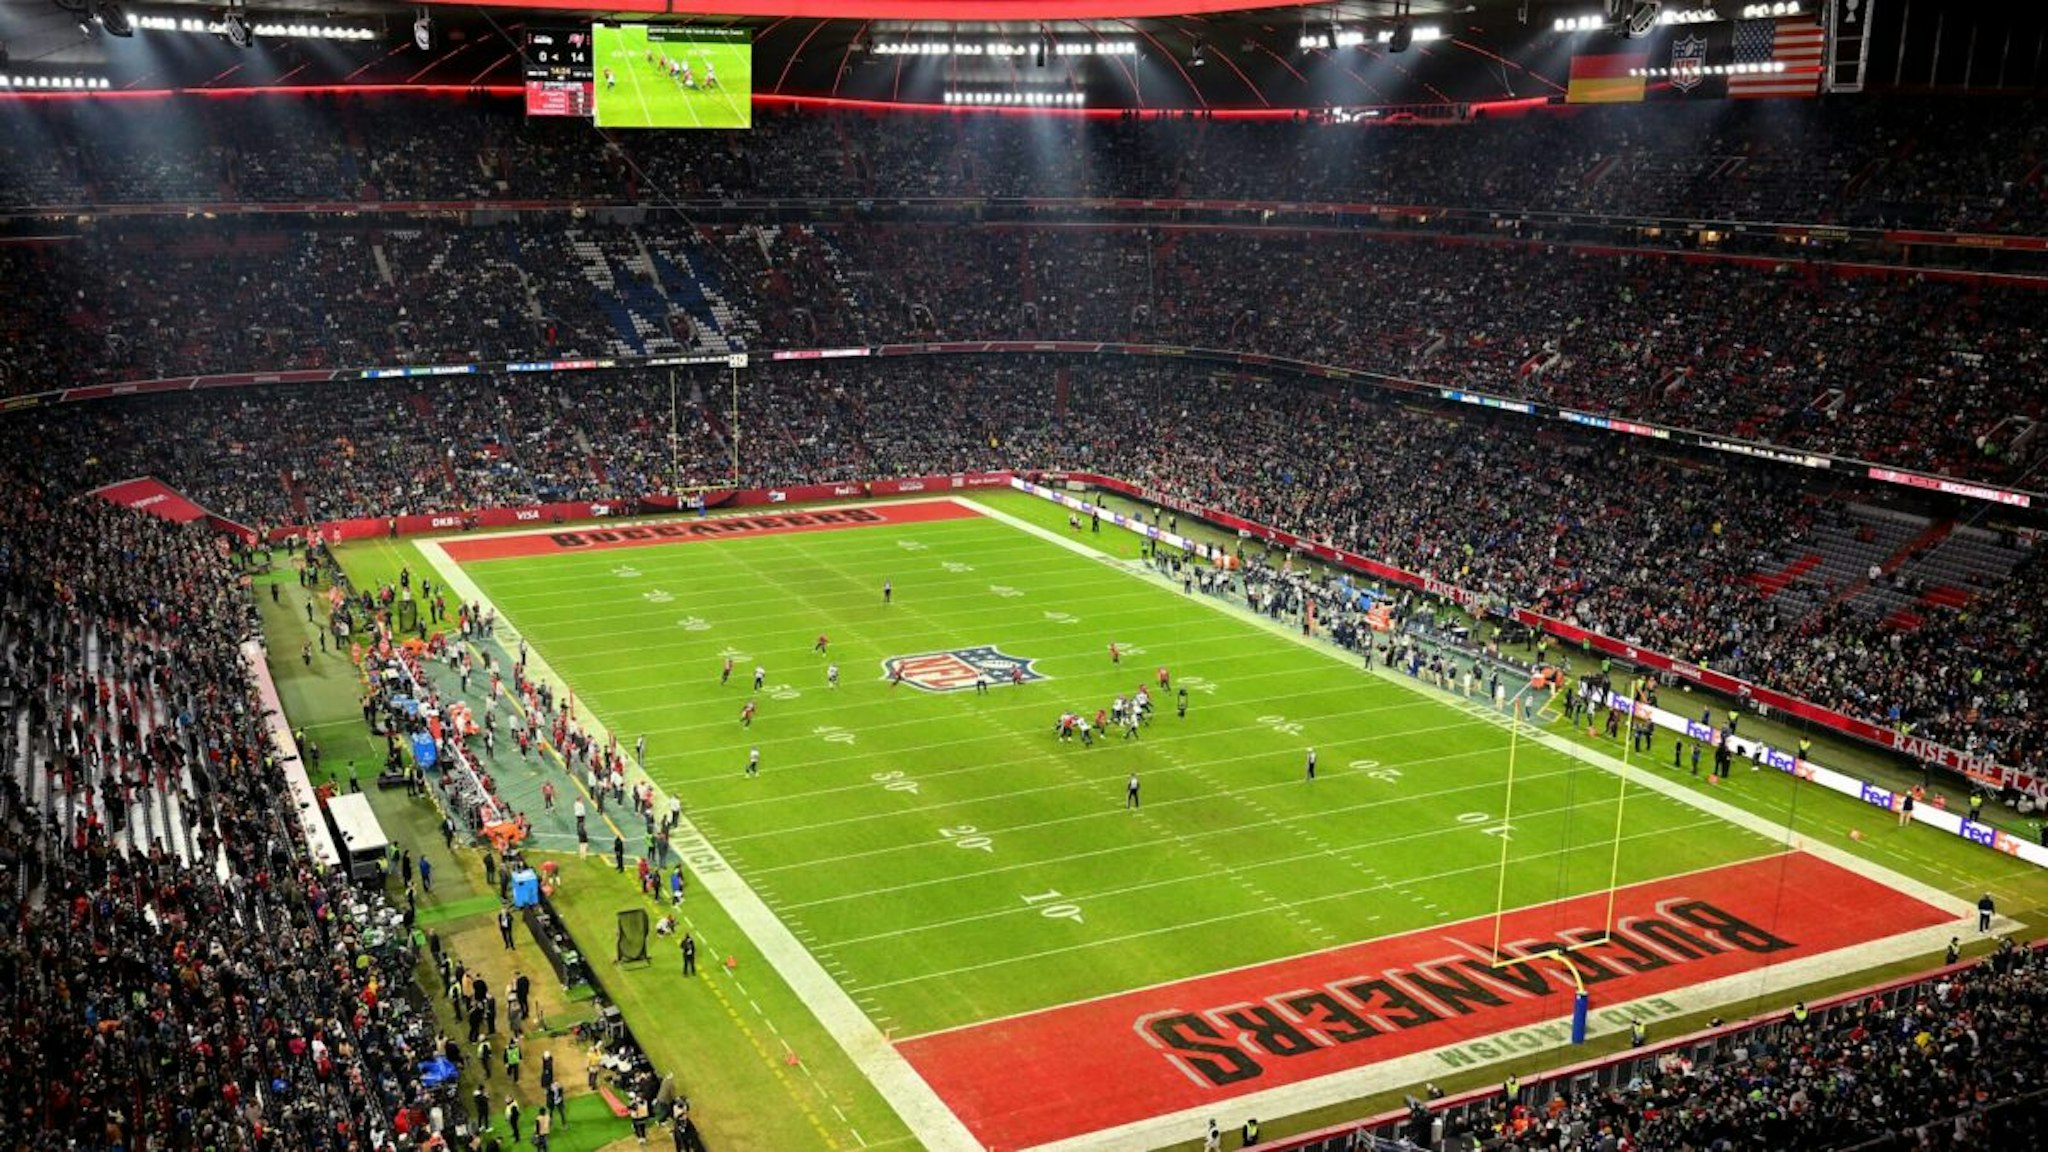 MUNICH, GERMANY - NOVEMBER 13: A general view of the inside of the stadium in the third quarter during the NFL match between Seattle Seahawks and Tampa Bay Buccaneers at Allianz Arena on November 13, 2022 in Munich, Germany.